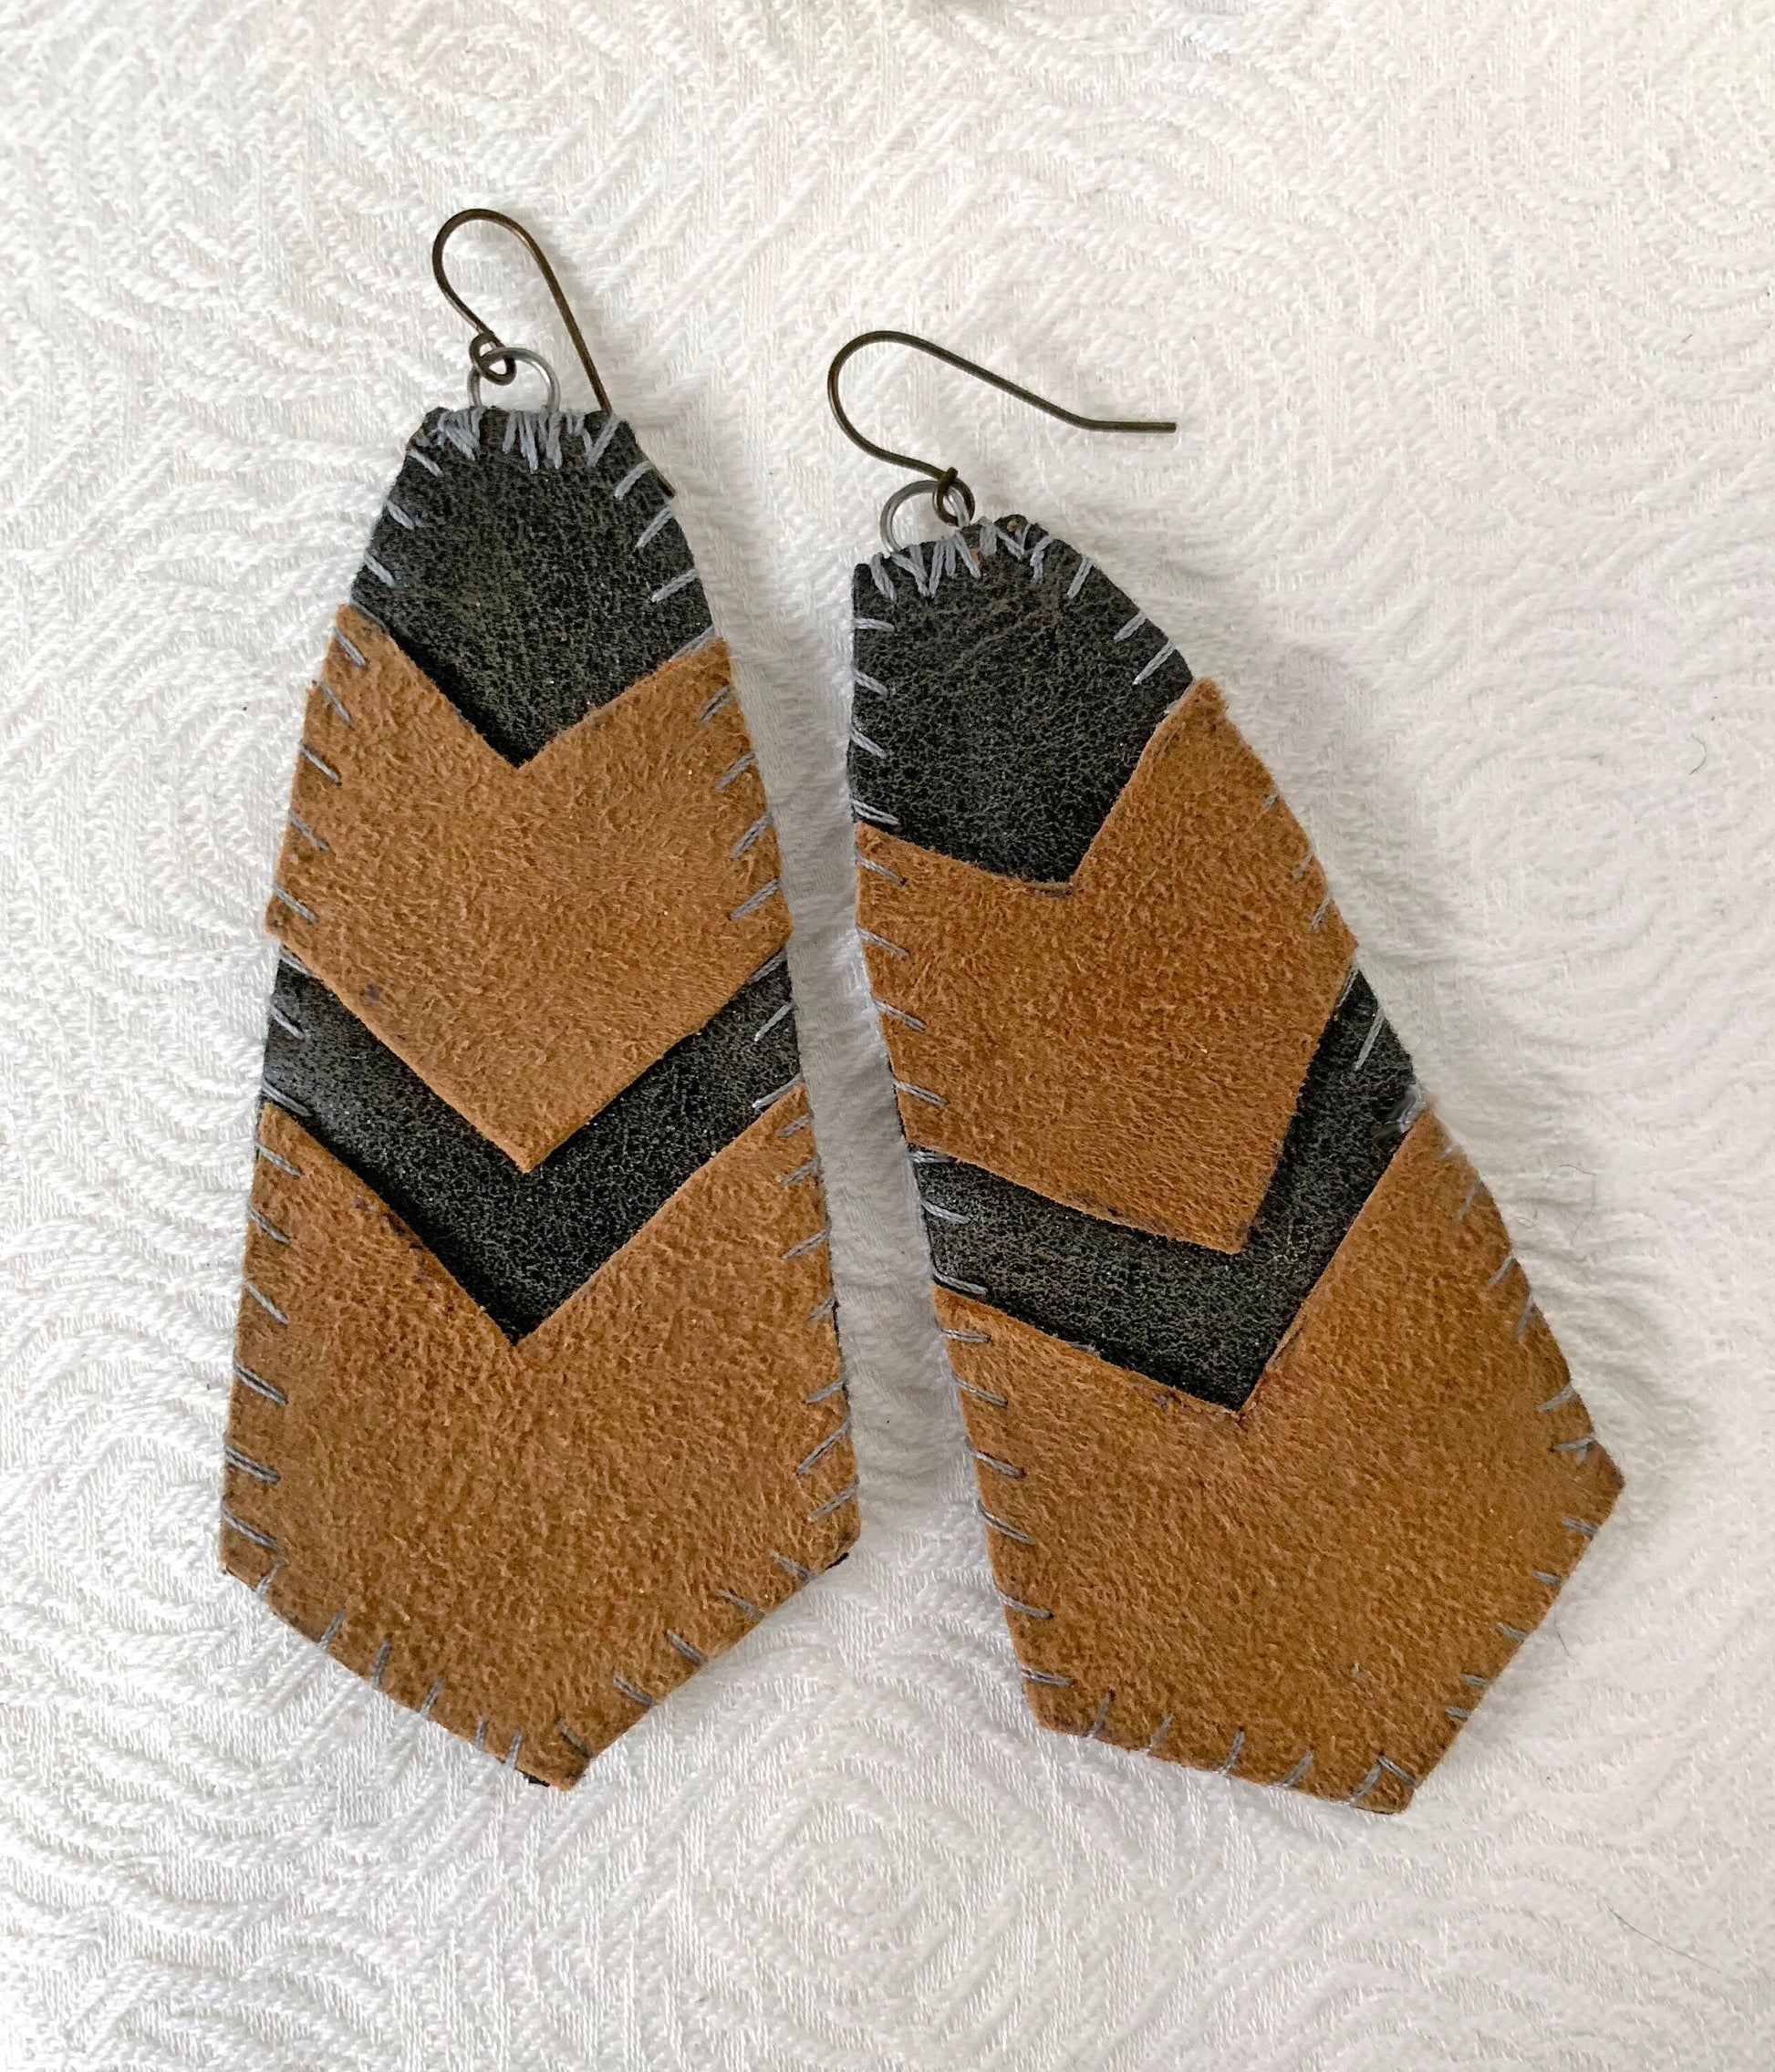 Charcoal and Tan Graphic Chevron ReClaimed Leather earrings - recycled leather